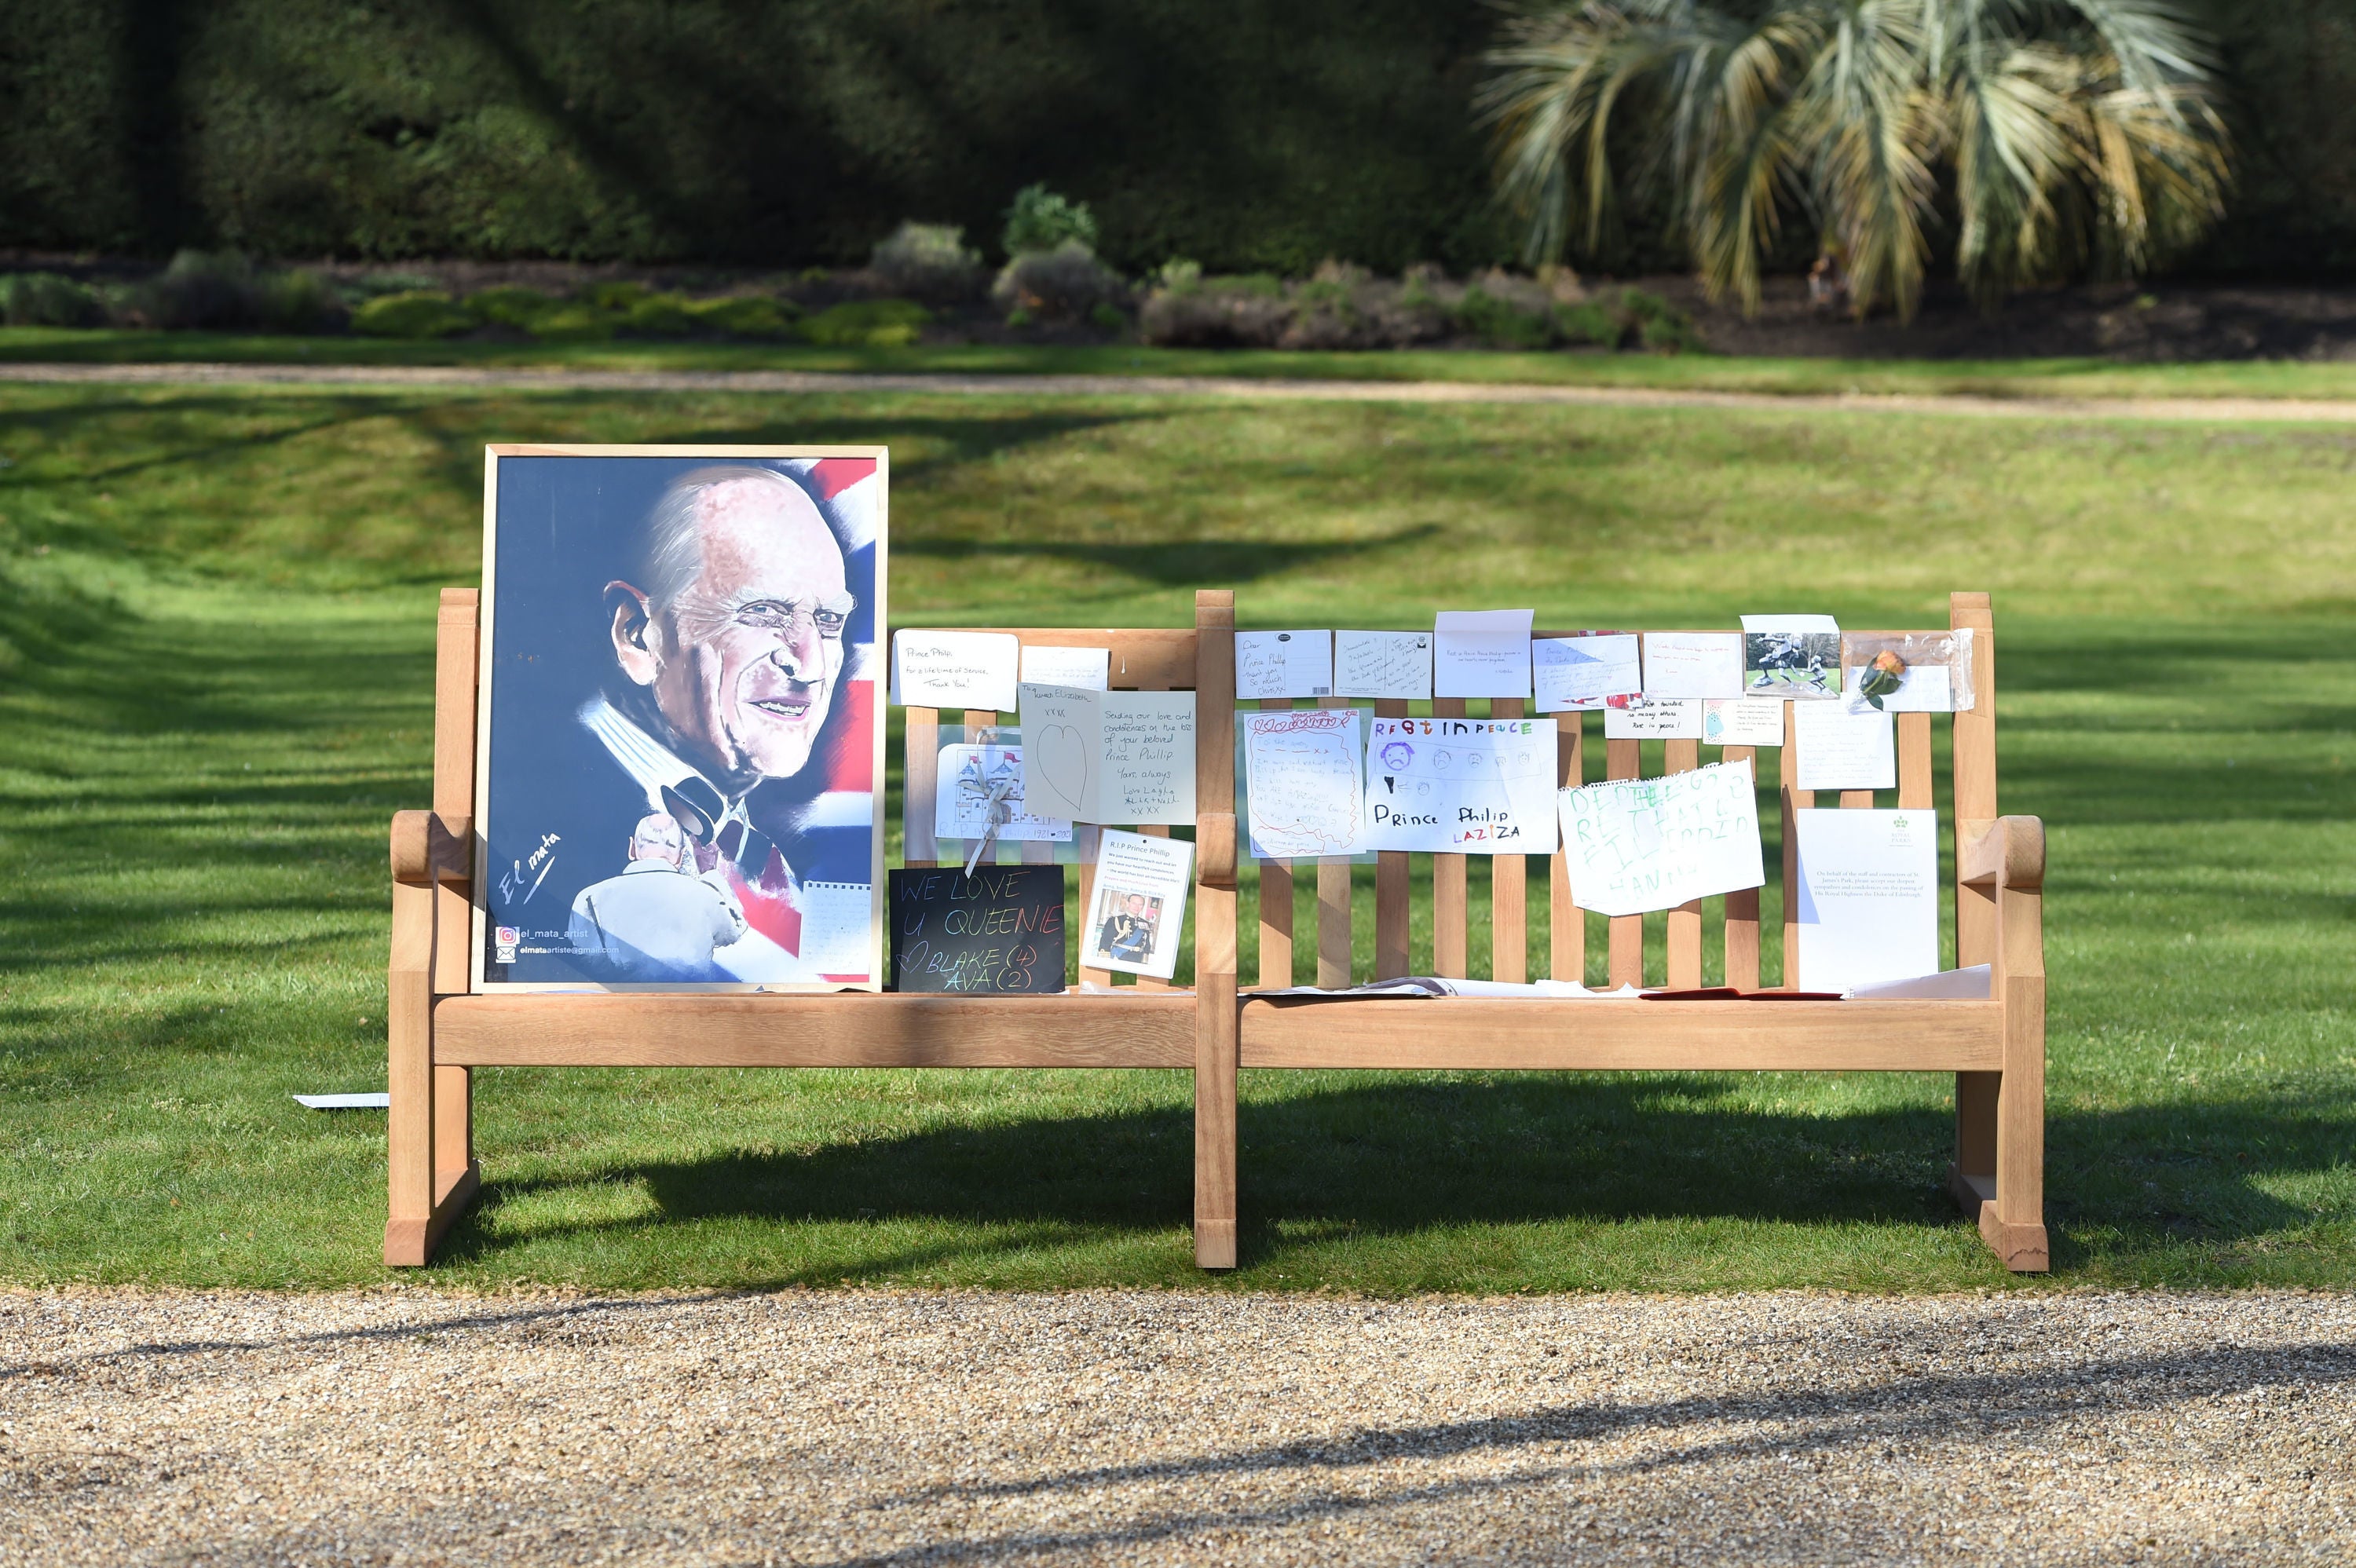 Notes and artwork left by members of the public outside Buckingham Palace following the death of the Duke of Edinburgh on display in the gardens of Marlborough House, London